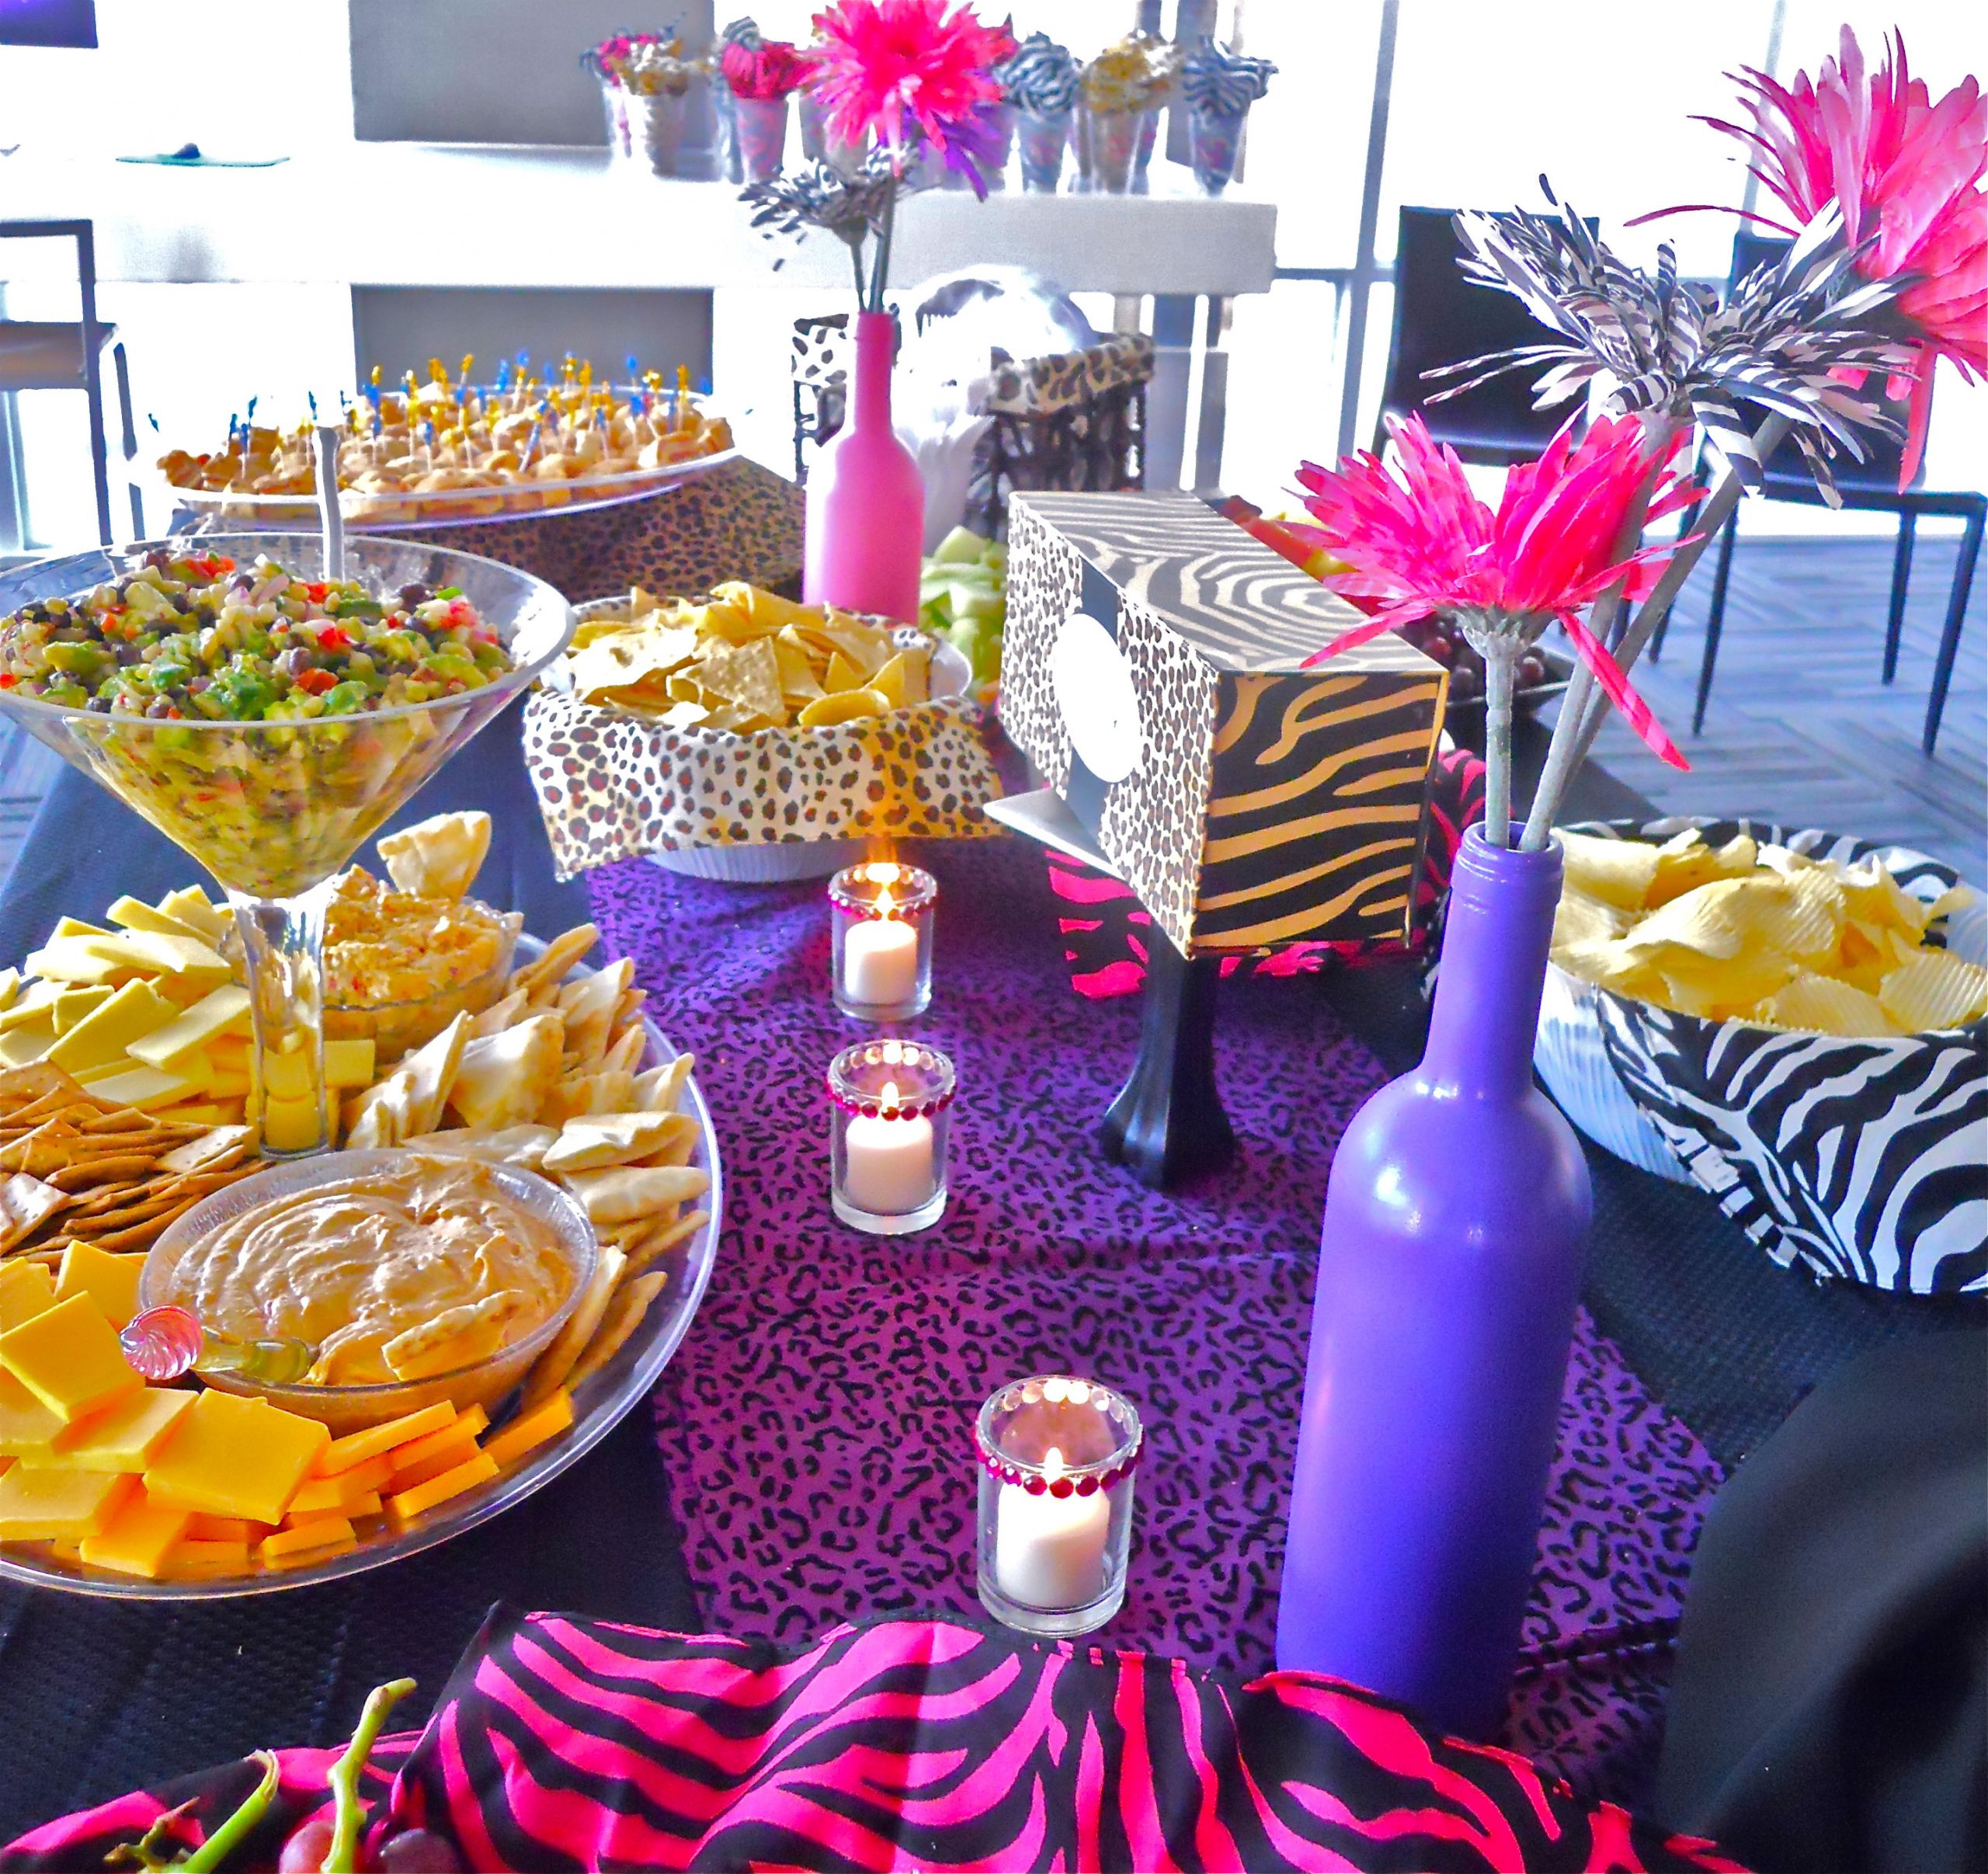 Bachelorette Party Snacks Ideas
 Real Housewives of Denver Bachelorette Party Ideas Part 2